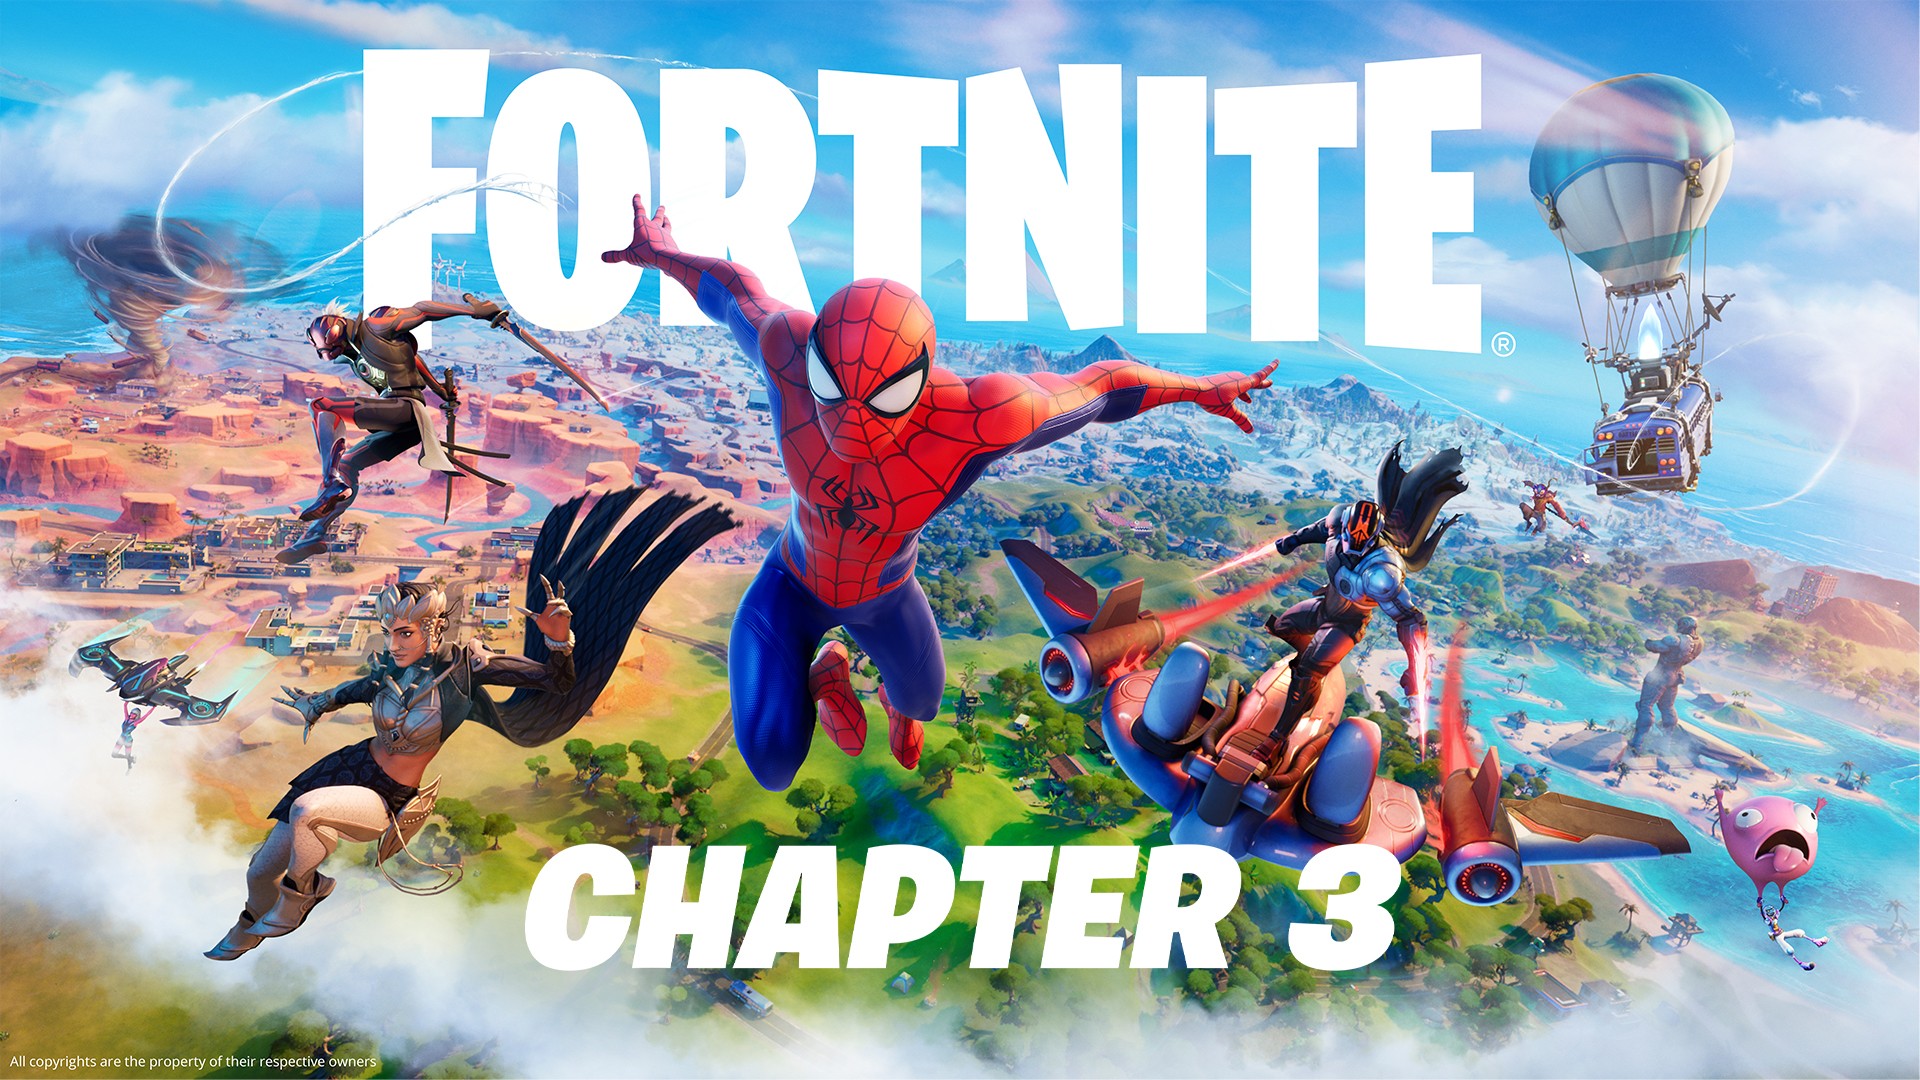 What's New in Fortnite Battle Royale Chapter 3 Season 1: Flipped